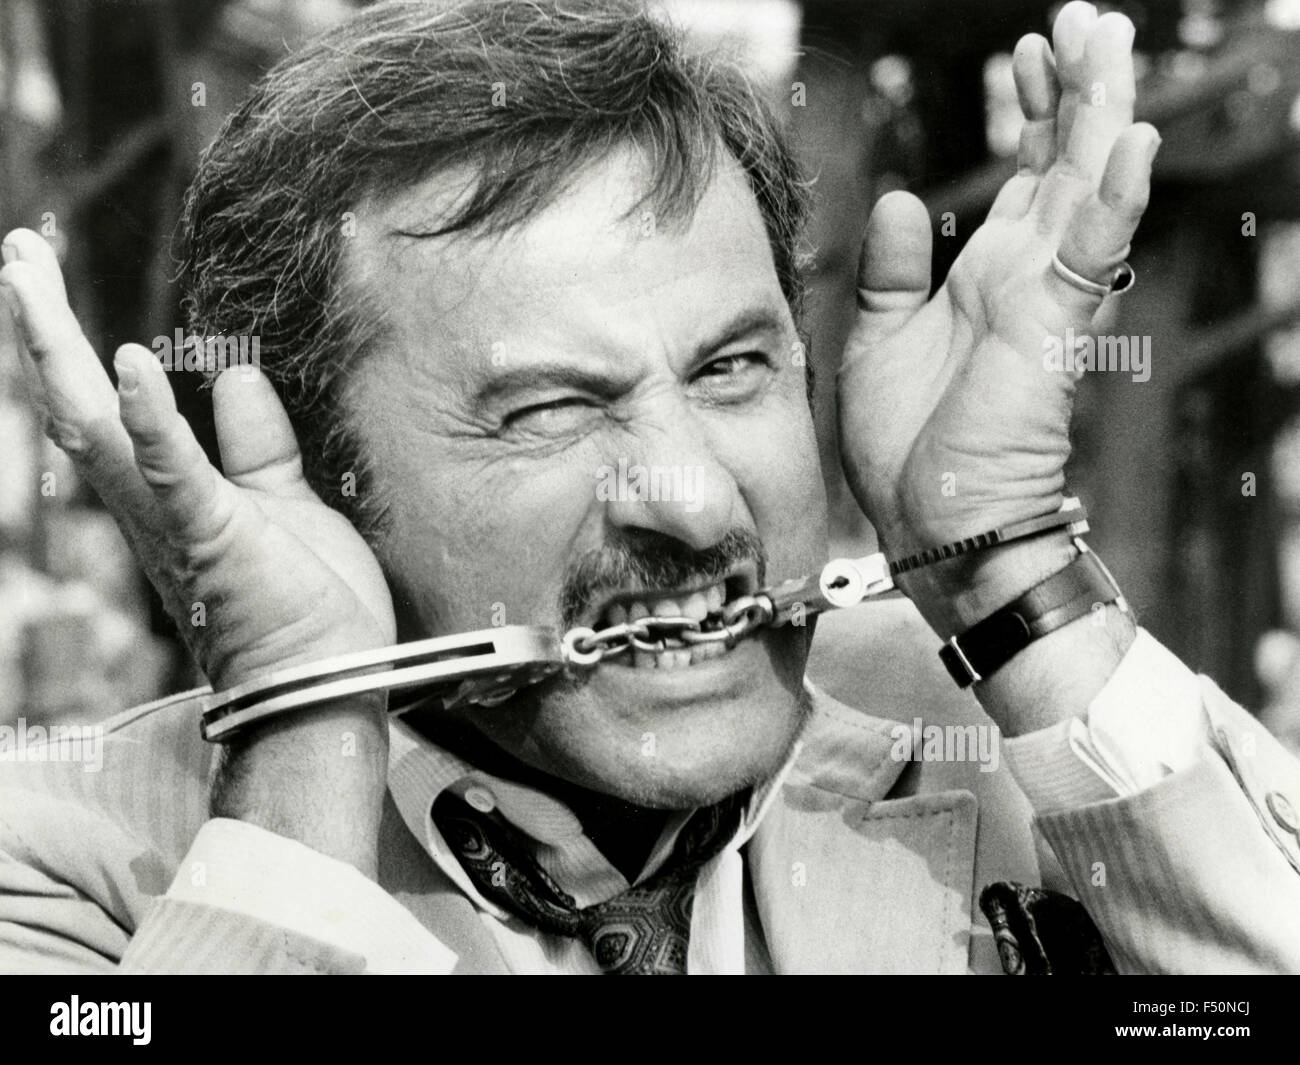 The American actor Eli Wallach in a scene from the film 'The Brain' (Le Cerveau), France Stock Photo